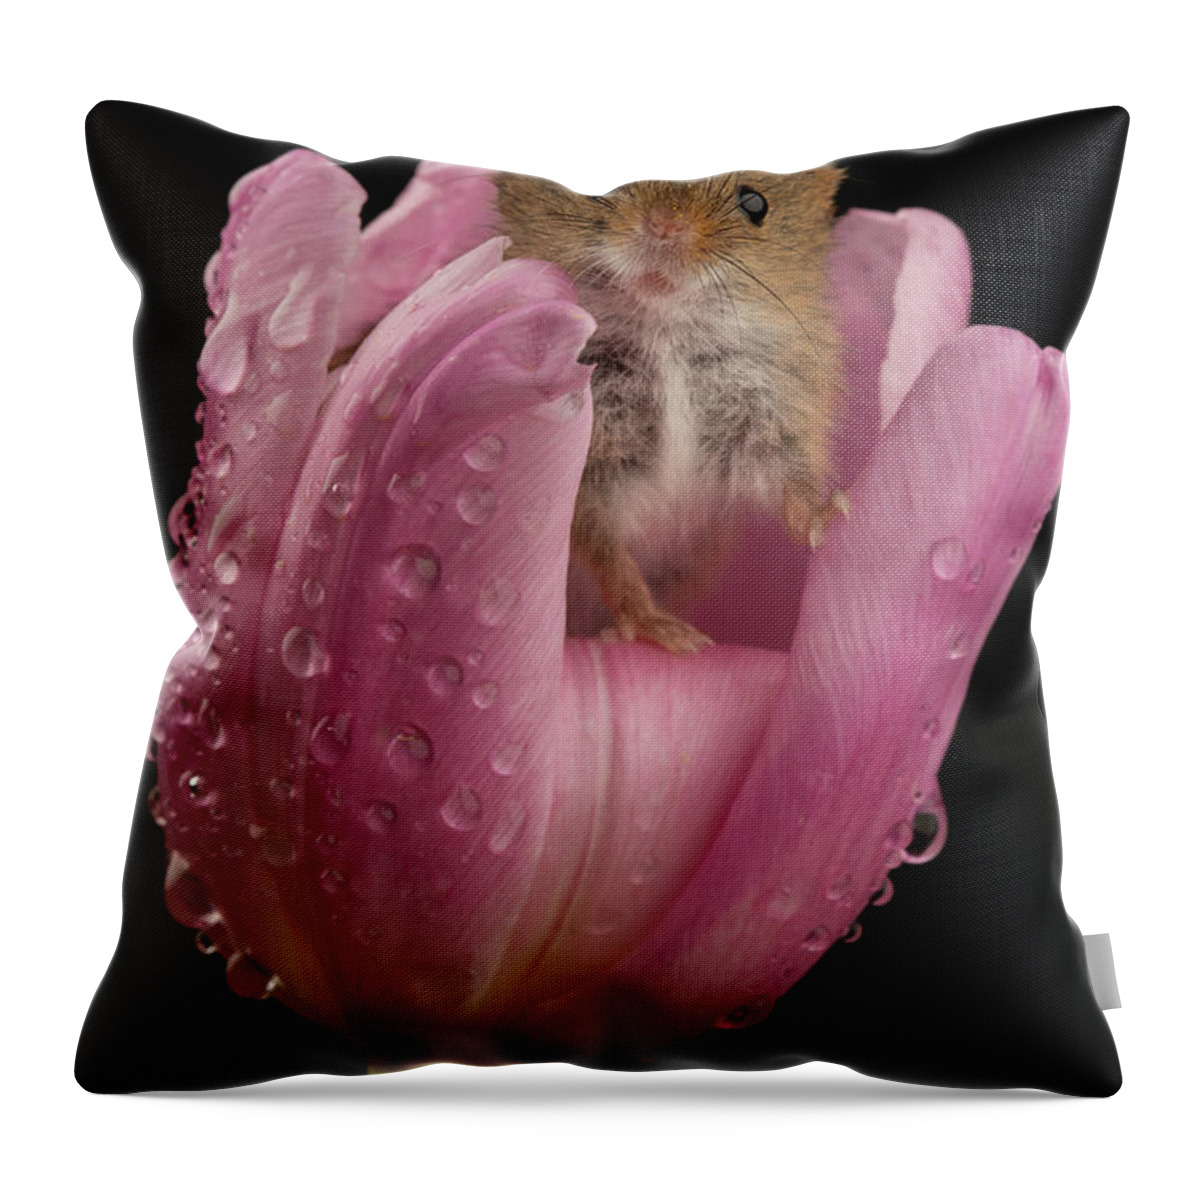 Harvest Throw Pillow featuring the photograph Hm-6460 by Miles Herbert